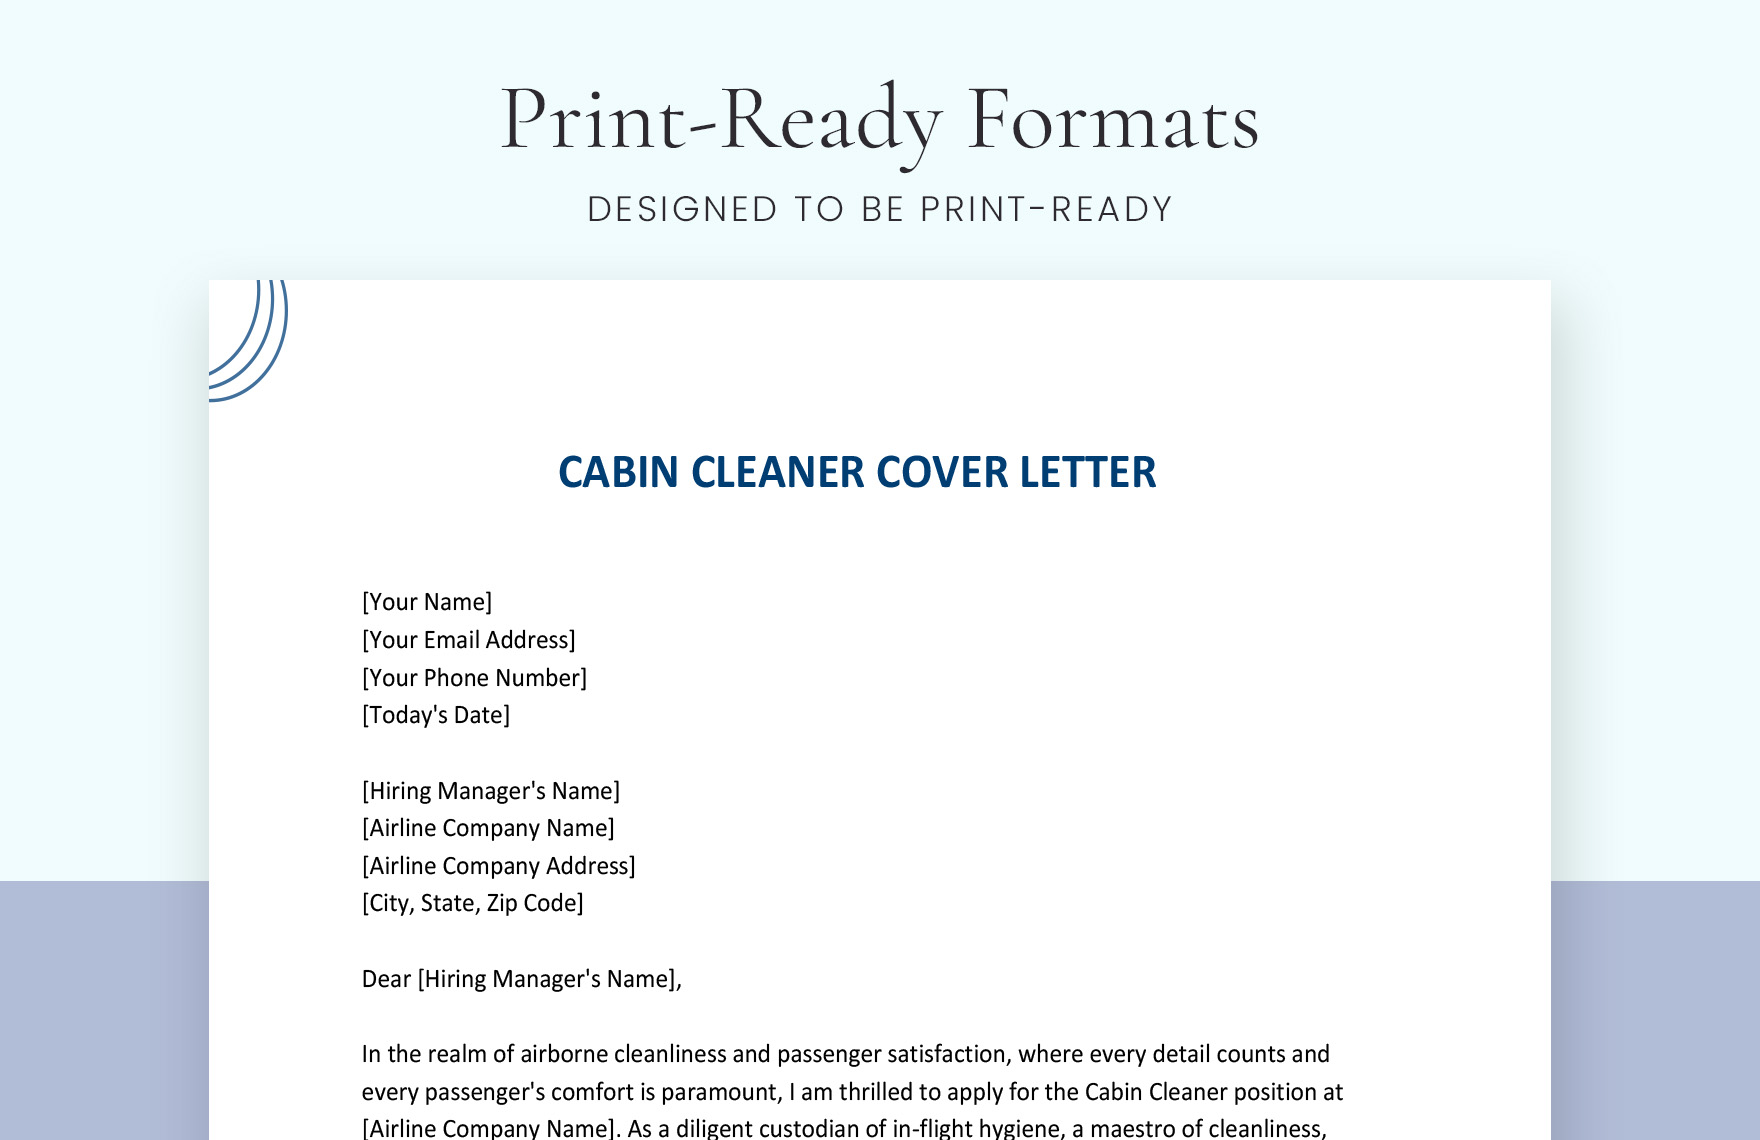 Cabin Cleaner Cover Letter